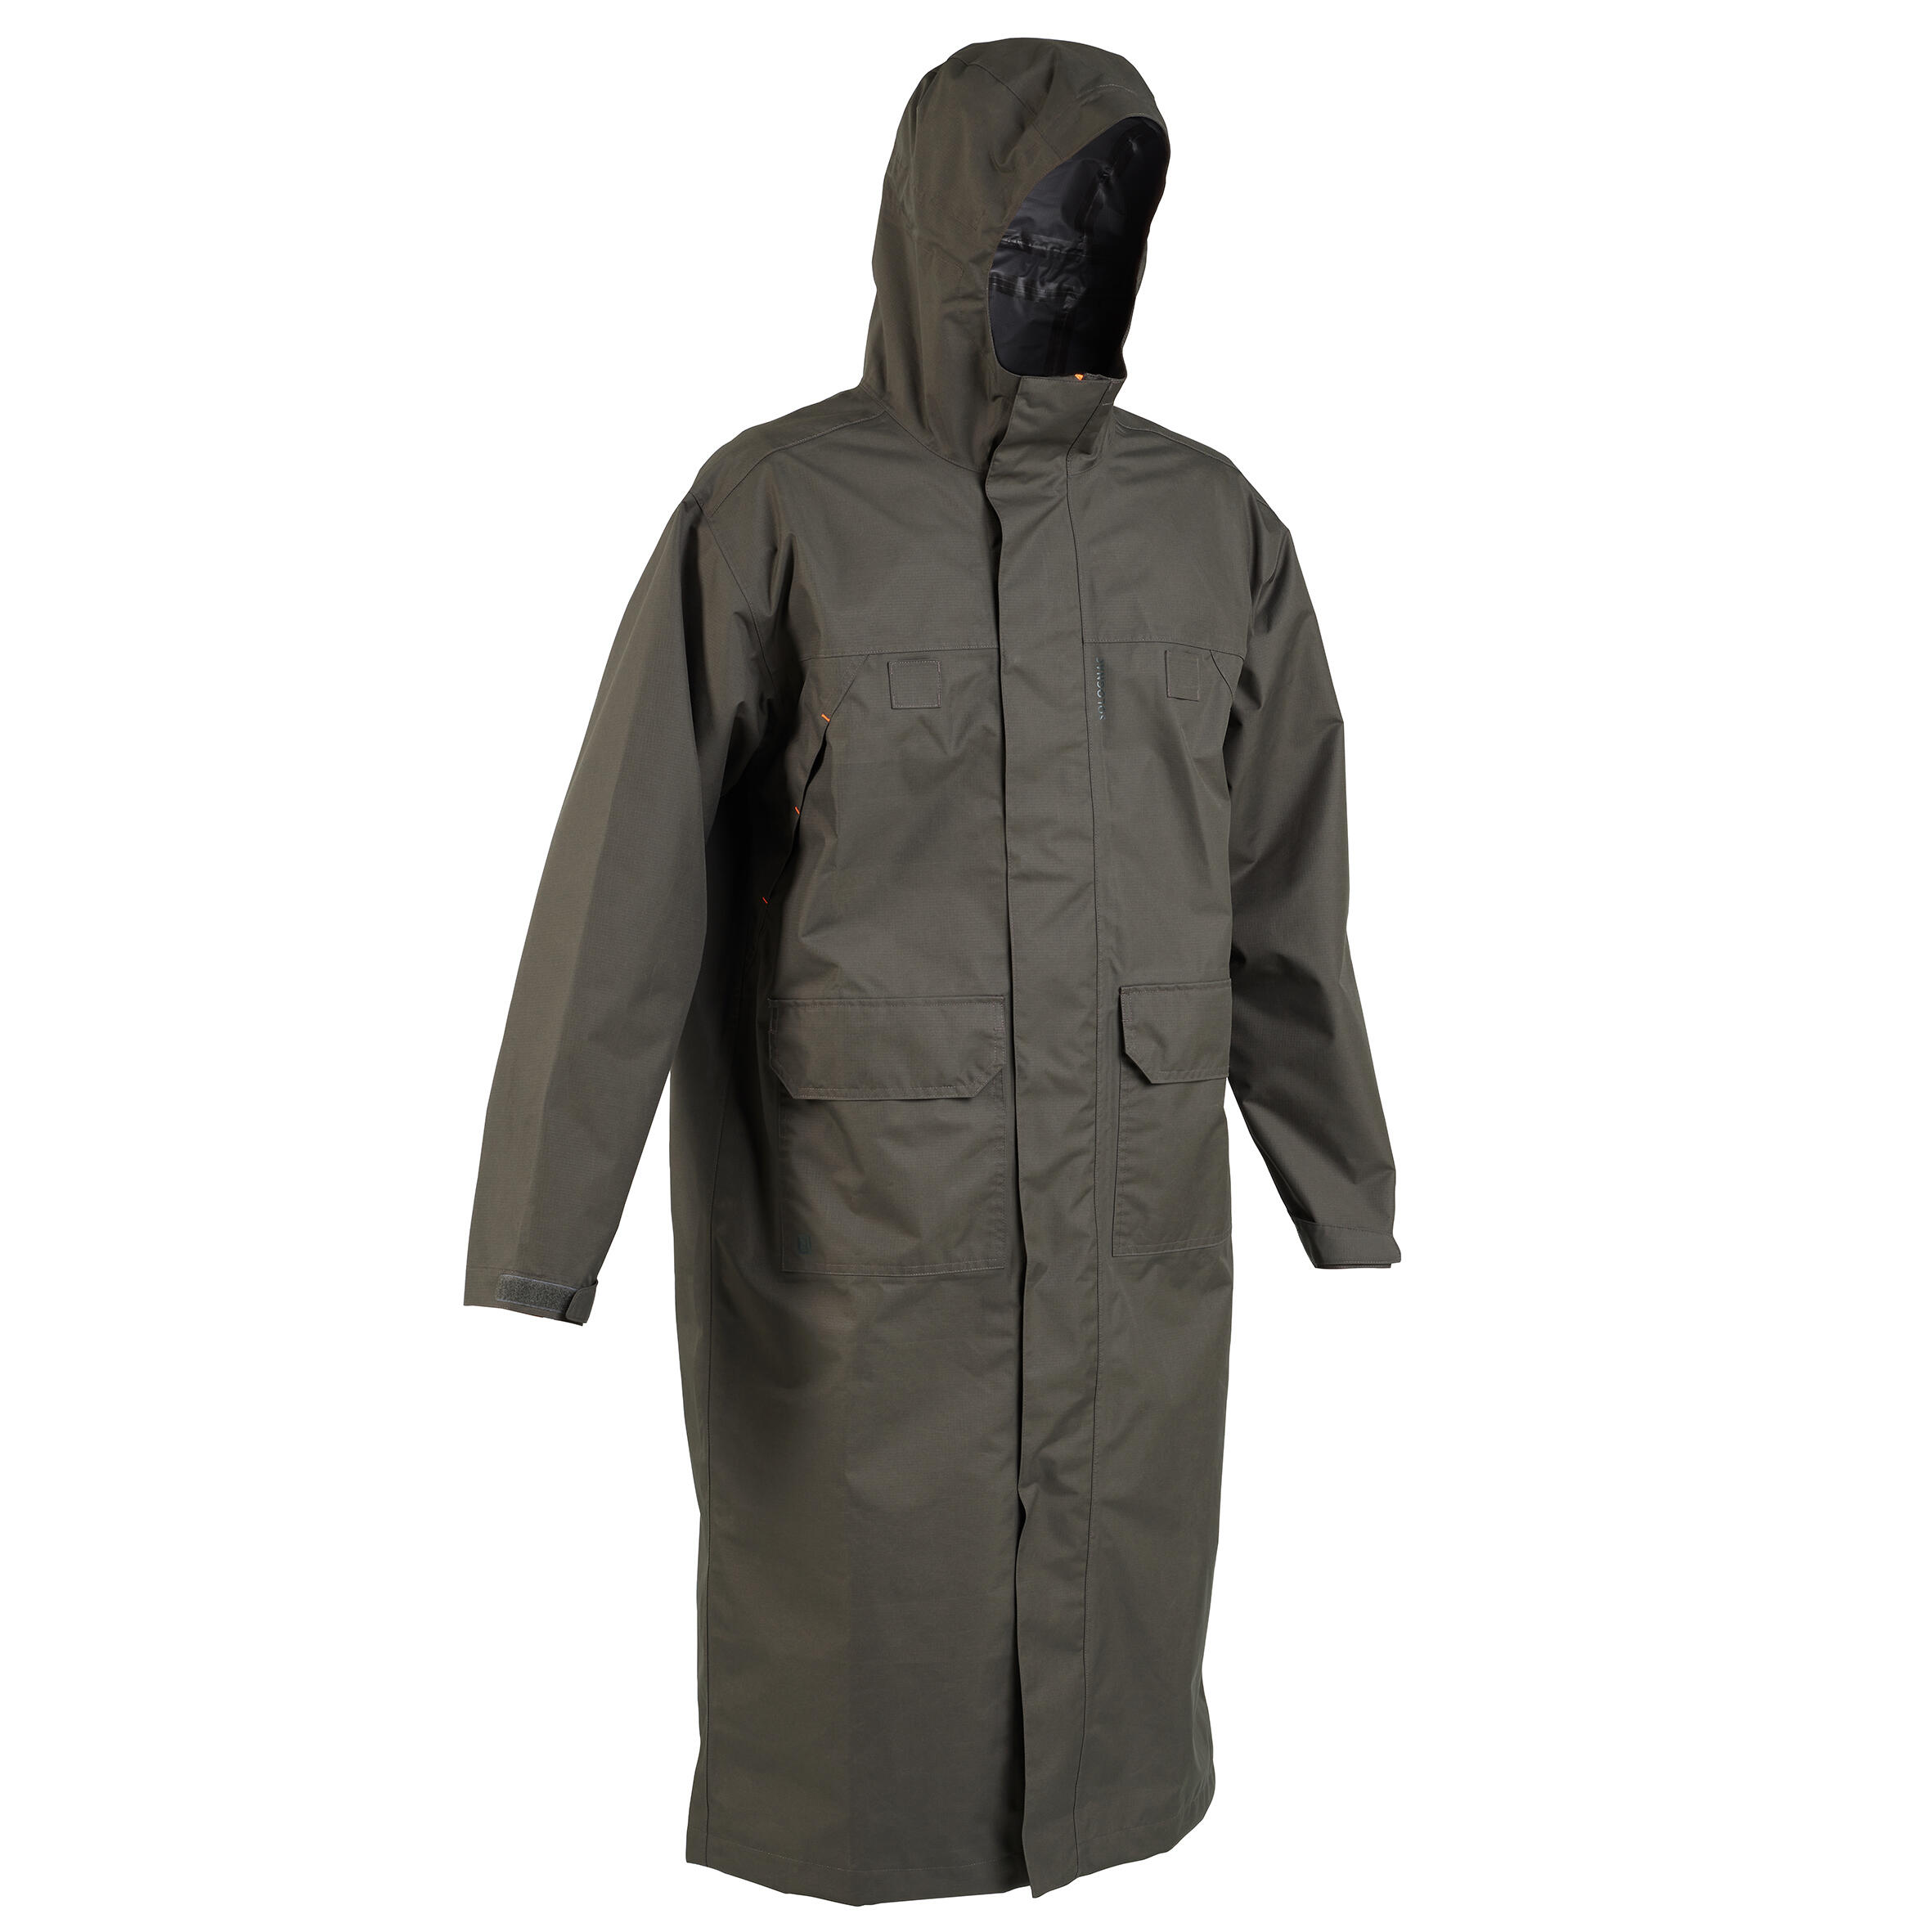 Stay Warm & Dry with Our Fishing Coats & Jackets